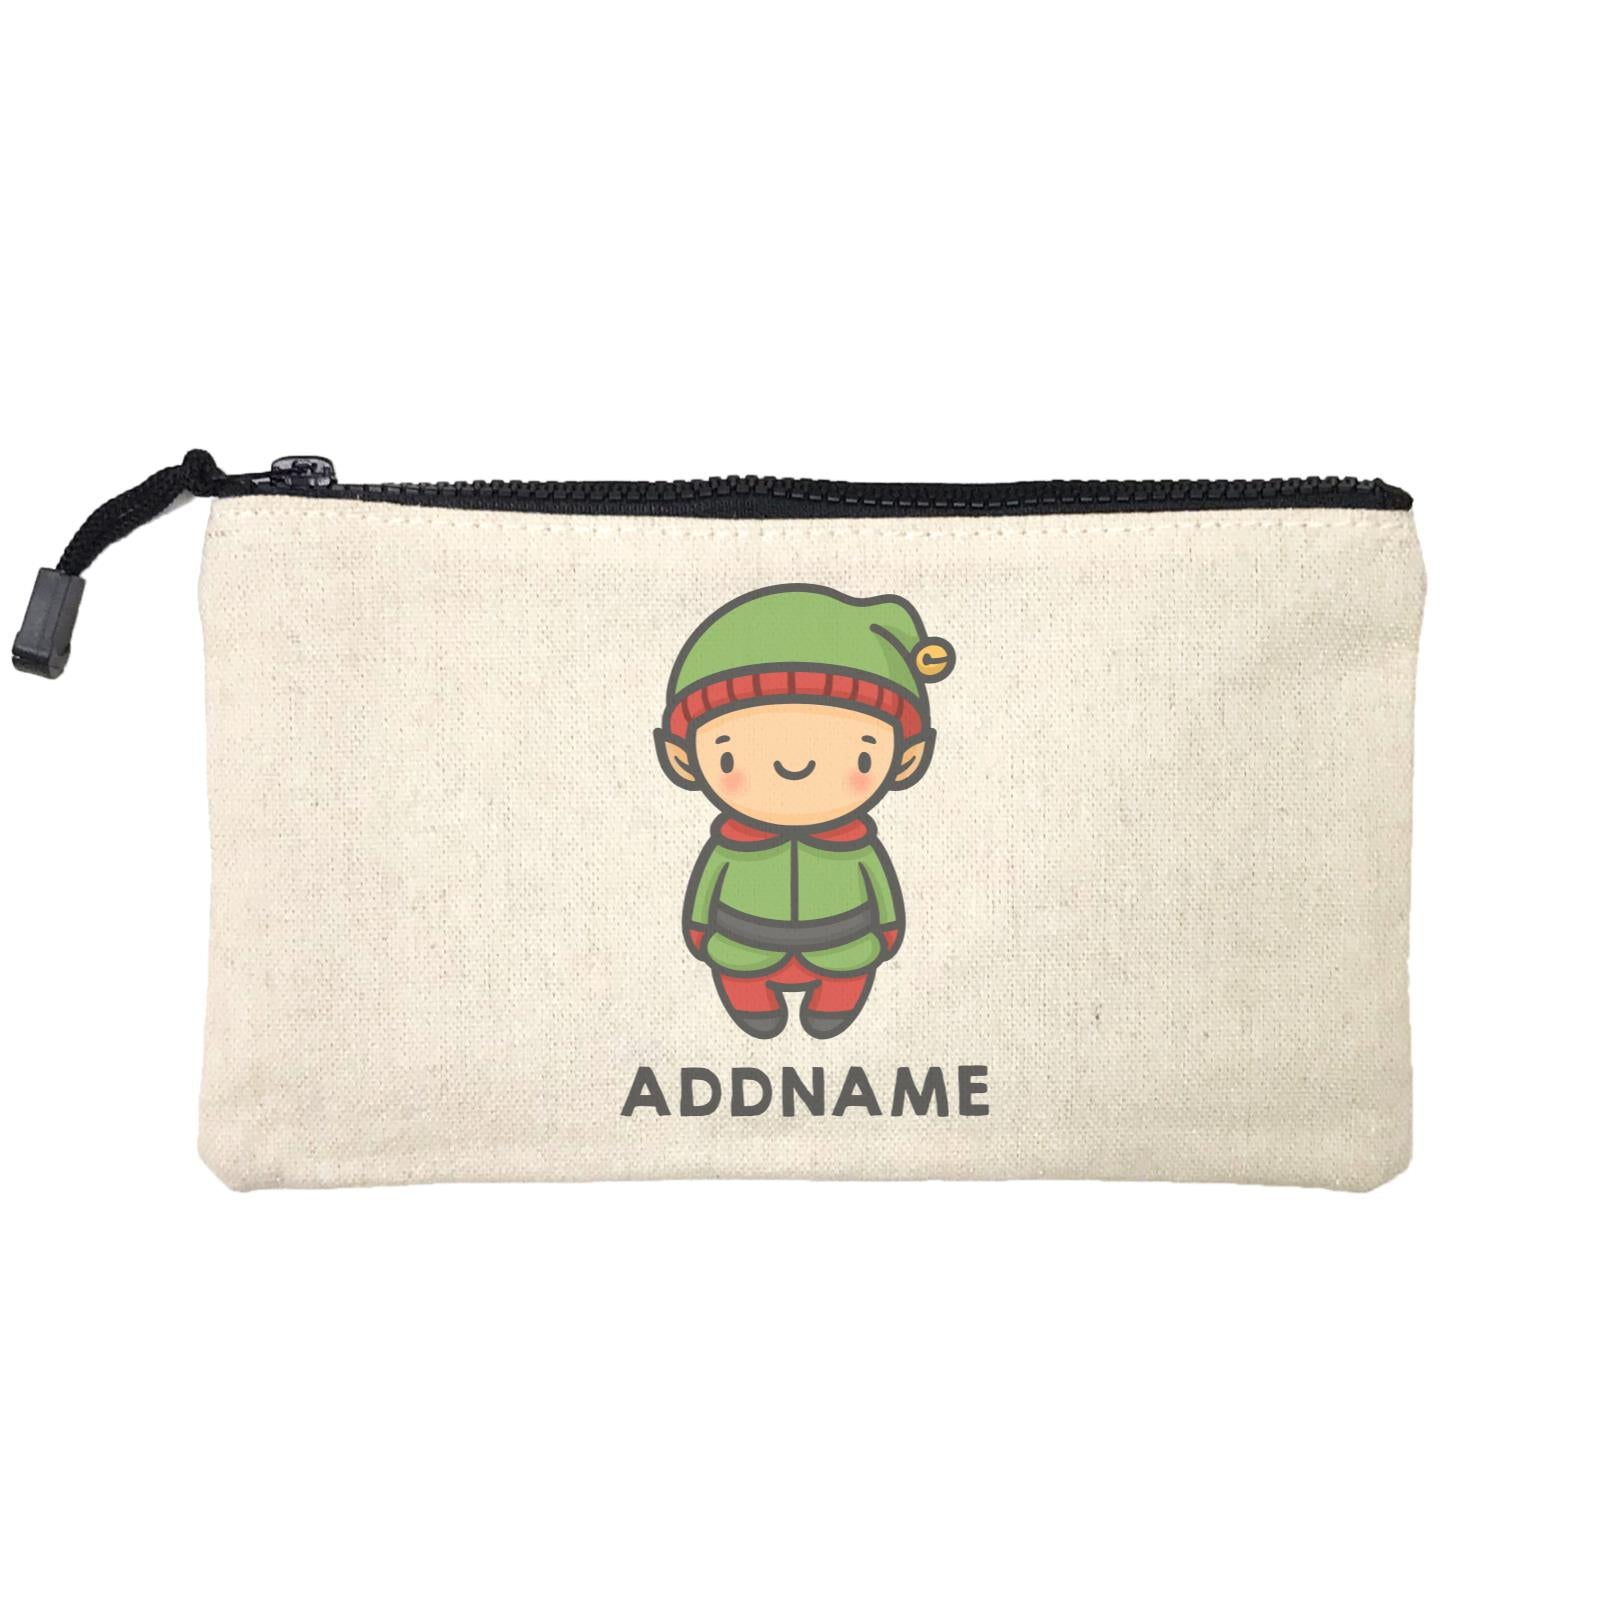 Xmas Cute Elf Addname Mini Accessories Stationery Pouch